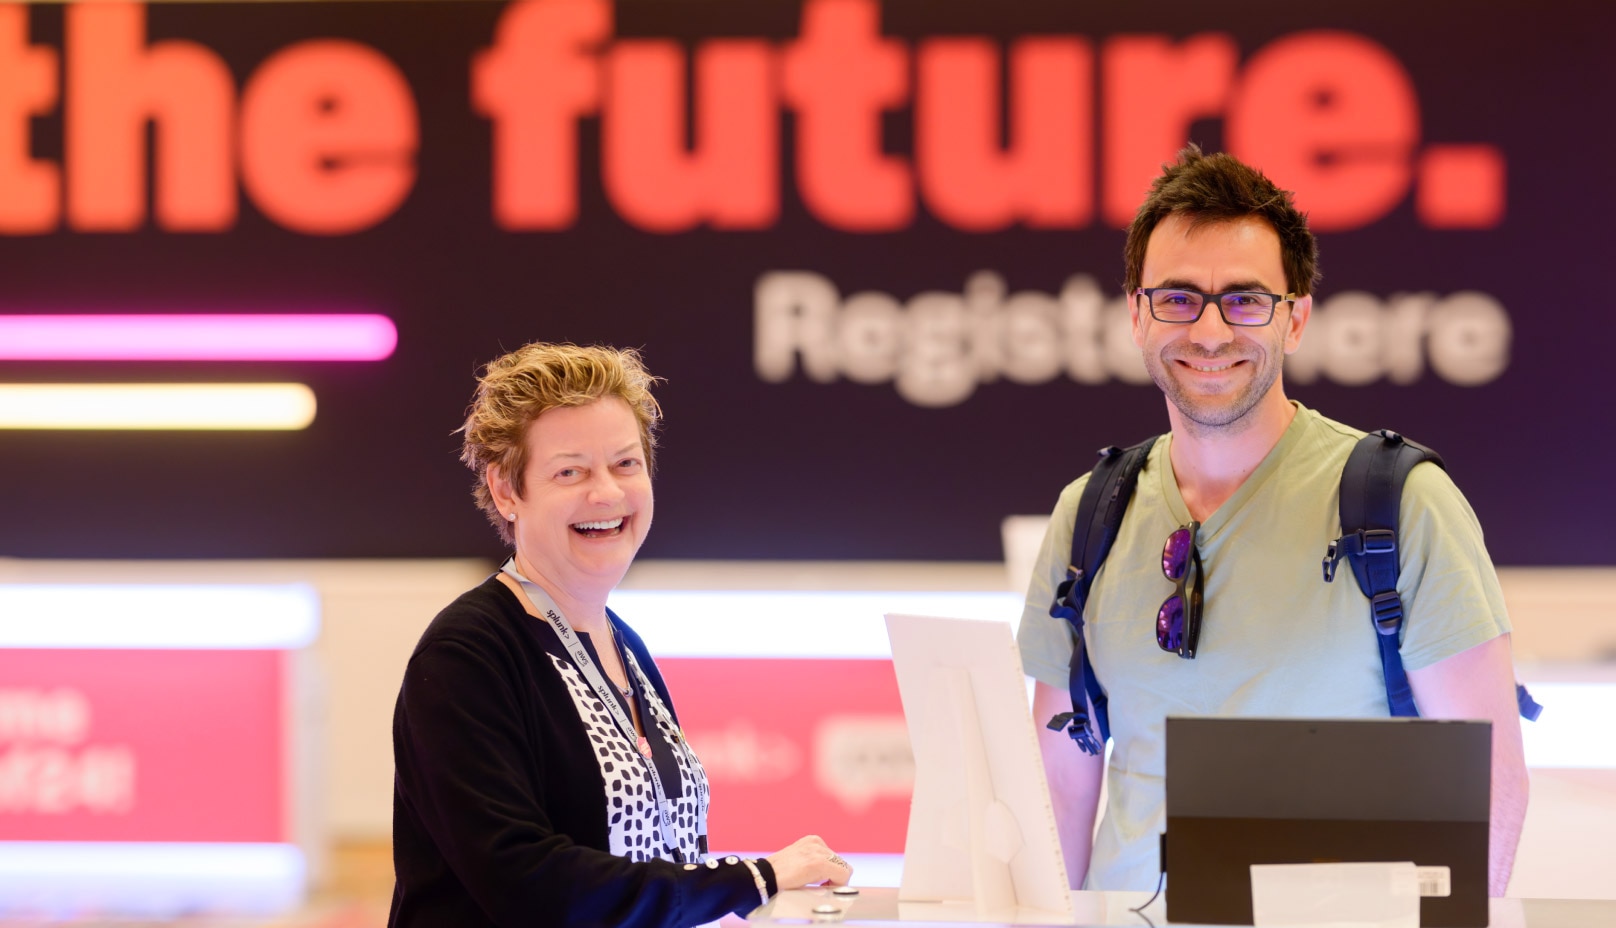 Man and woman posing at .conf registration